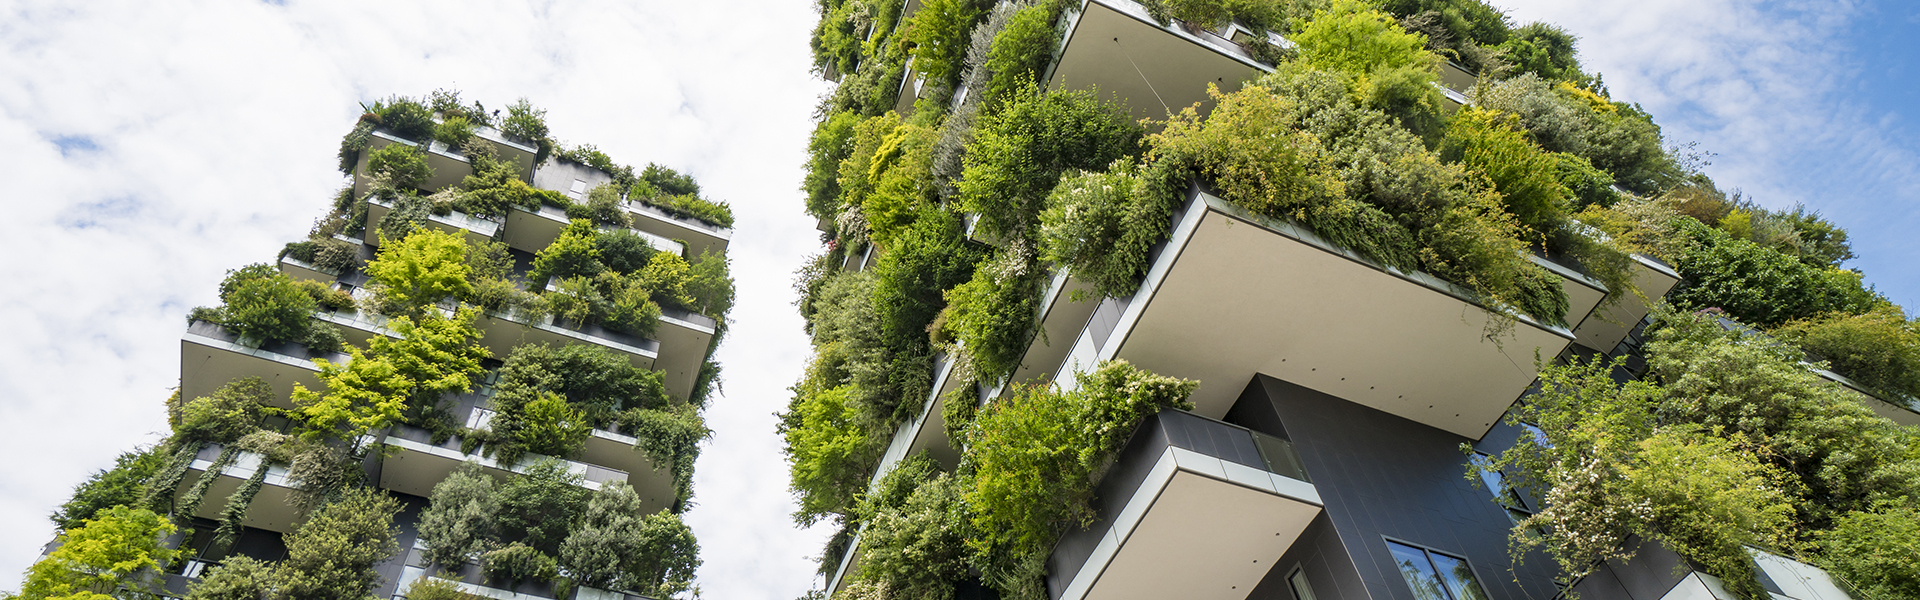 What is environmentally conscious building